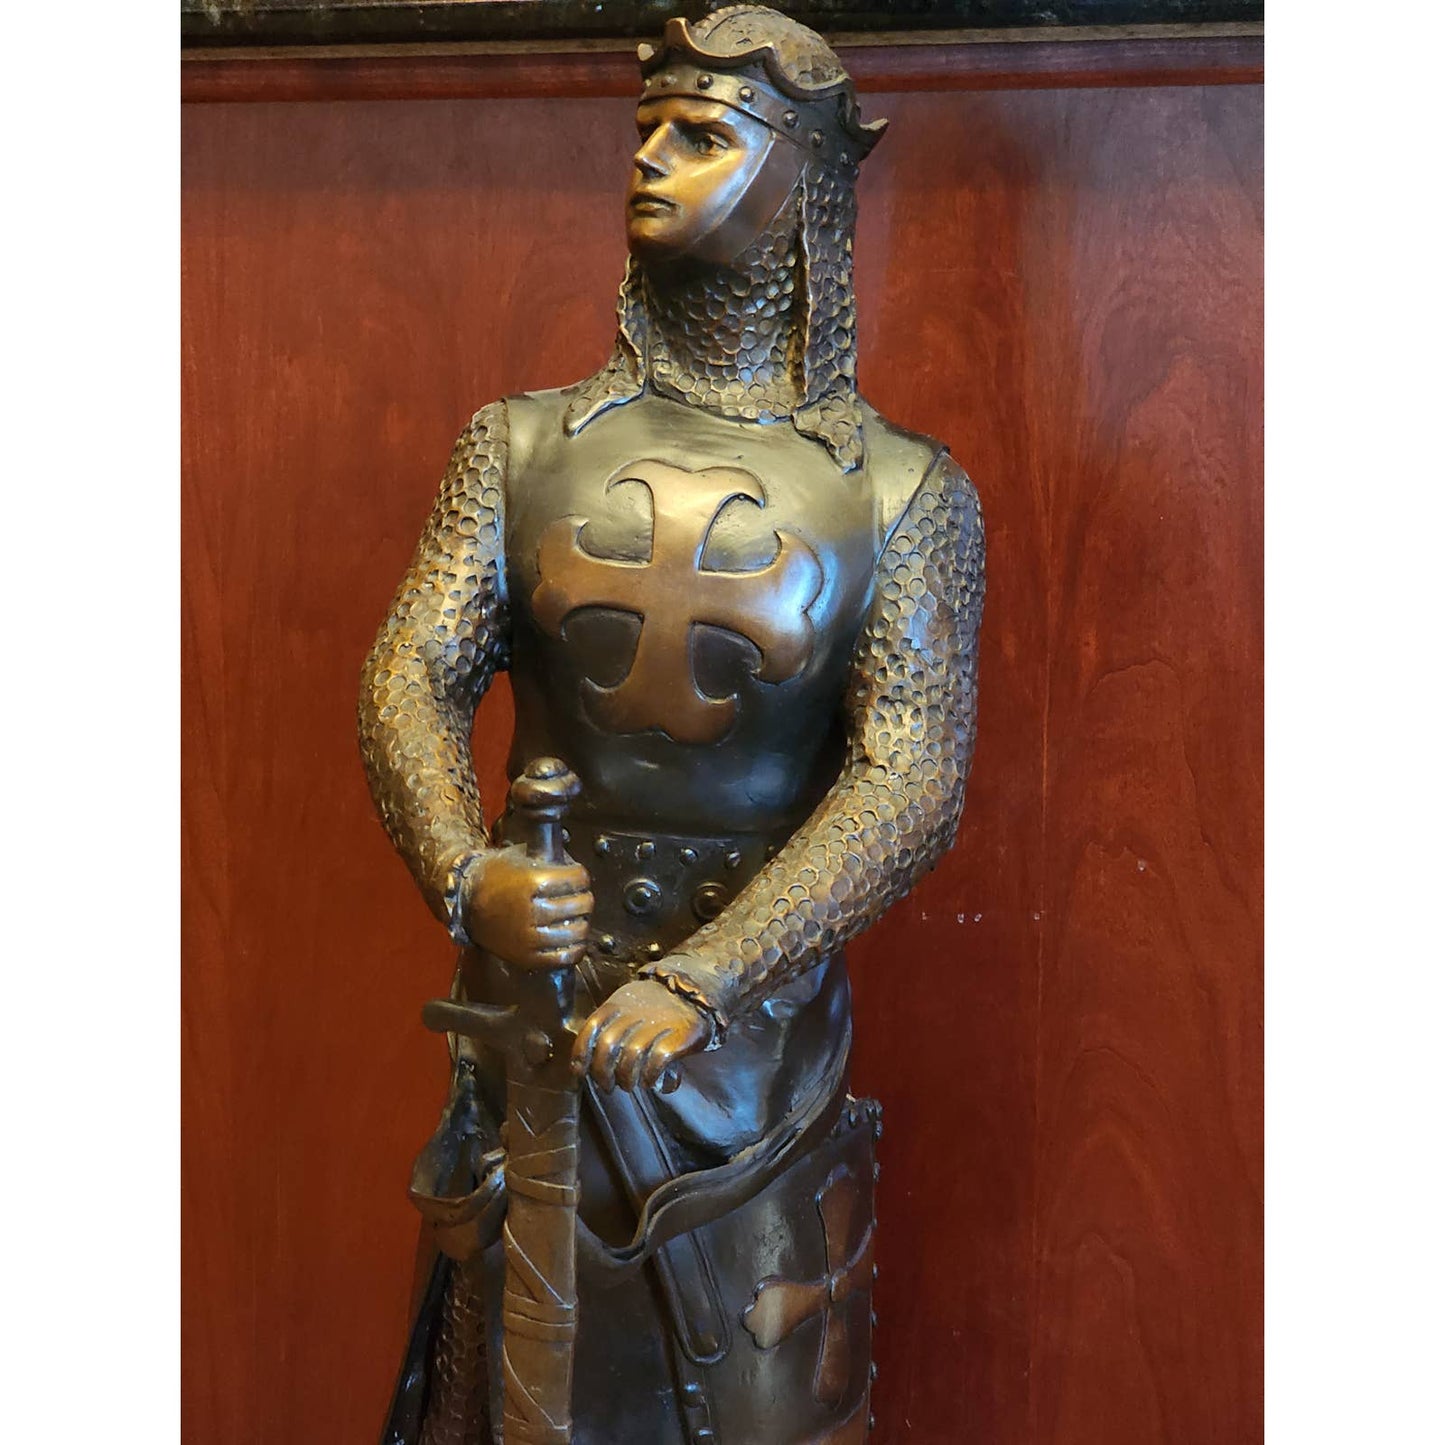 Knights Templar Crusader Bronze Sculpture Signed Giancarlo Le Preur Medieval 34"